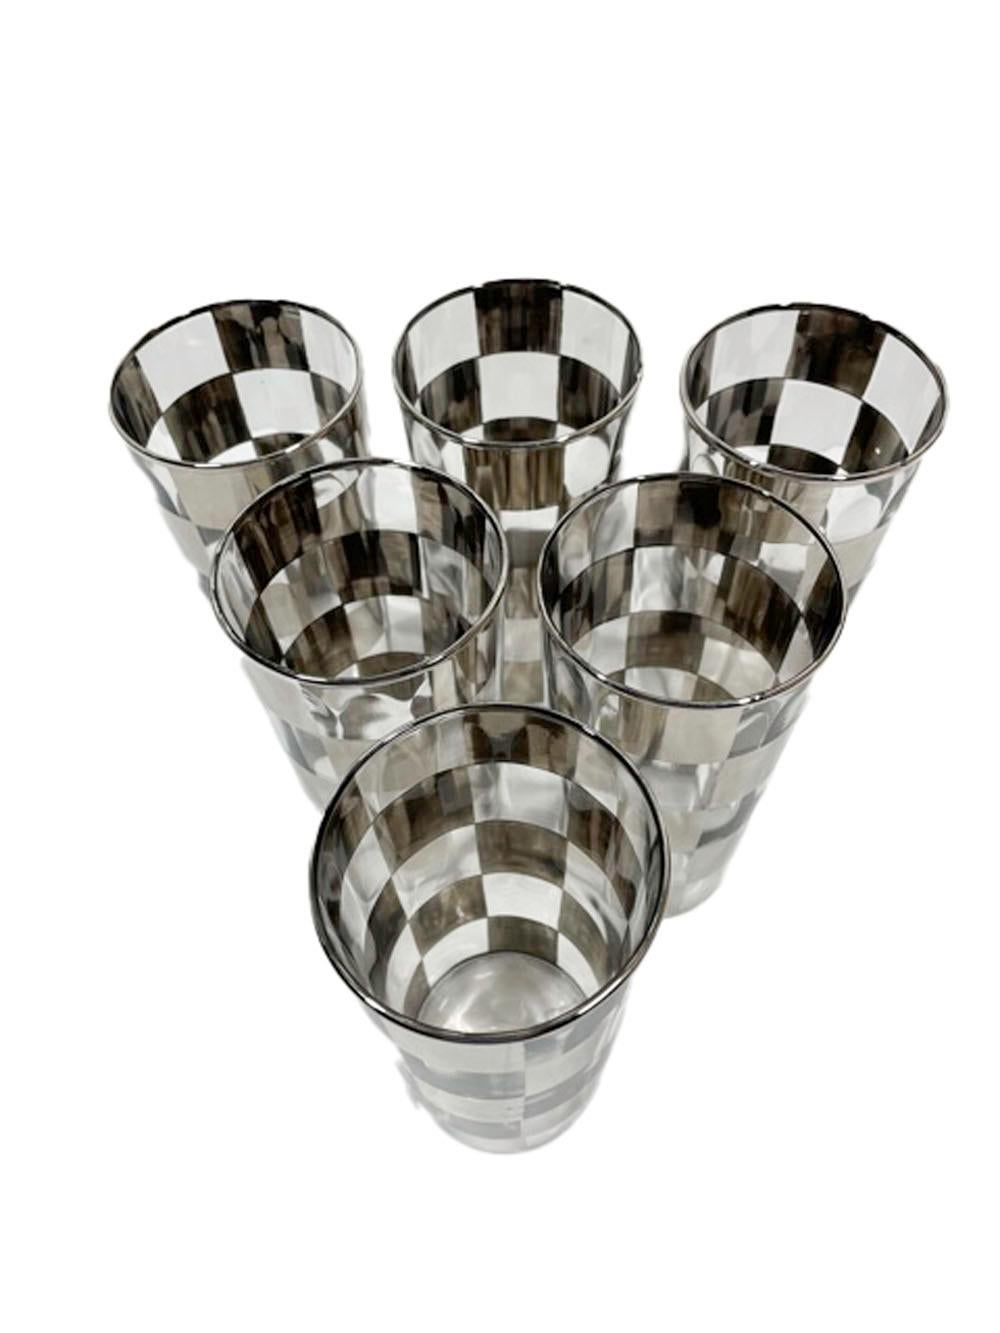 Art Deco Silver Check Cocktail Shaker, Pitcher, Ice Bowl & Six Highball Glasses For Sale 1